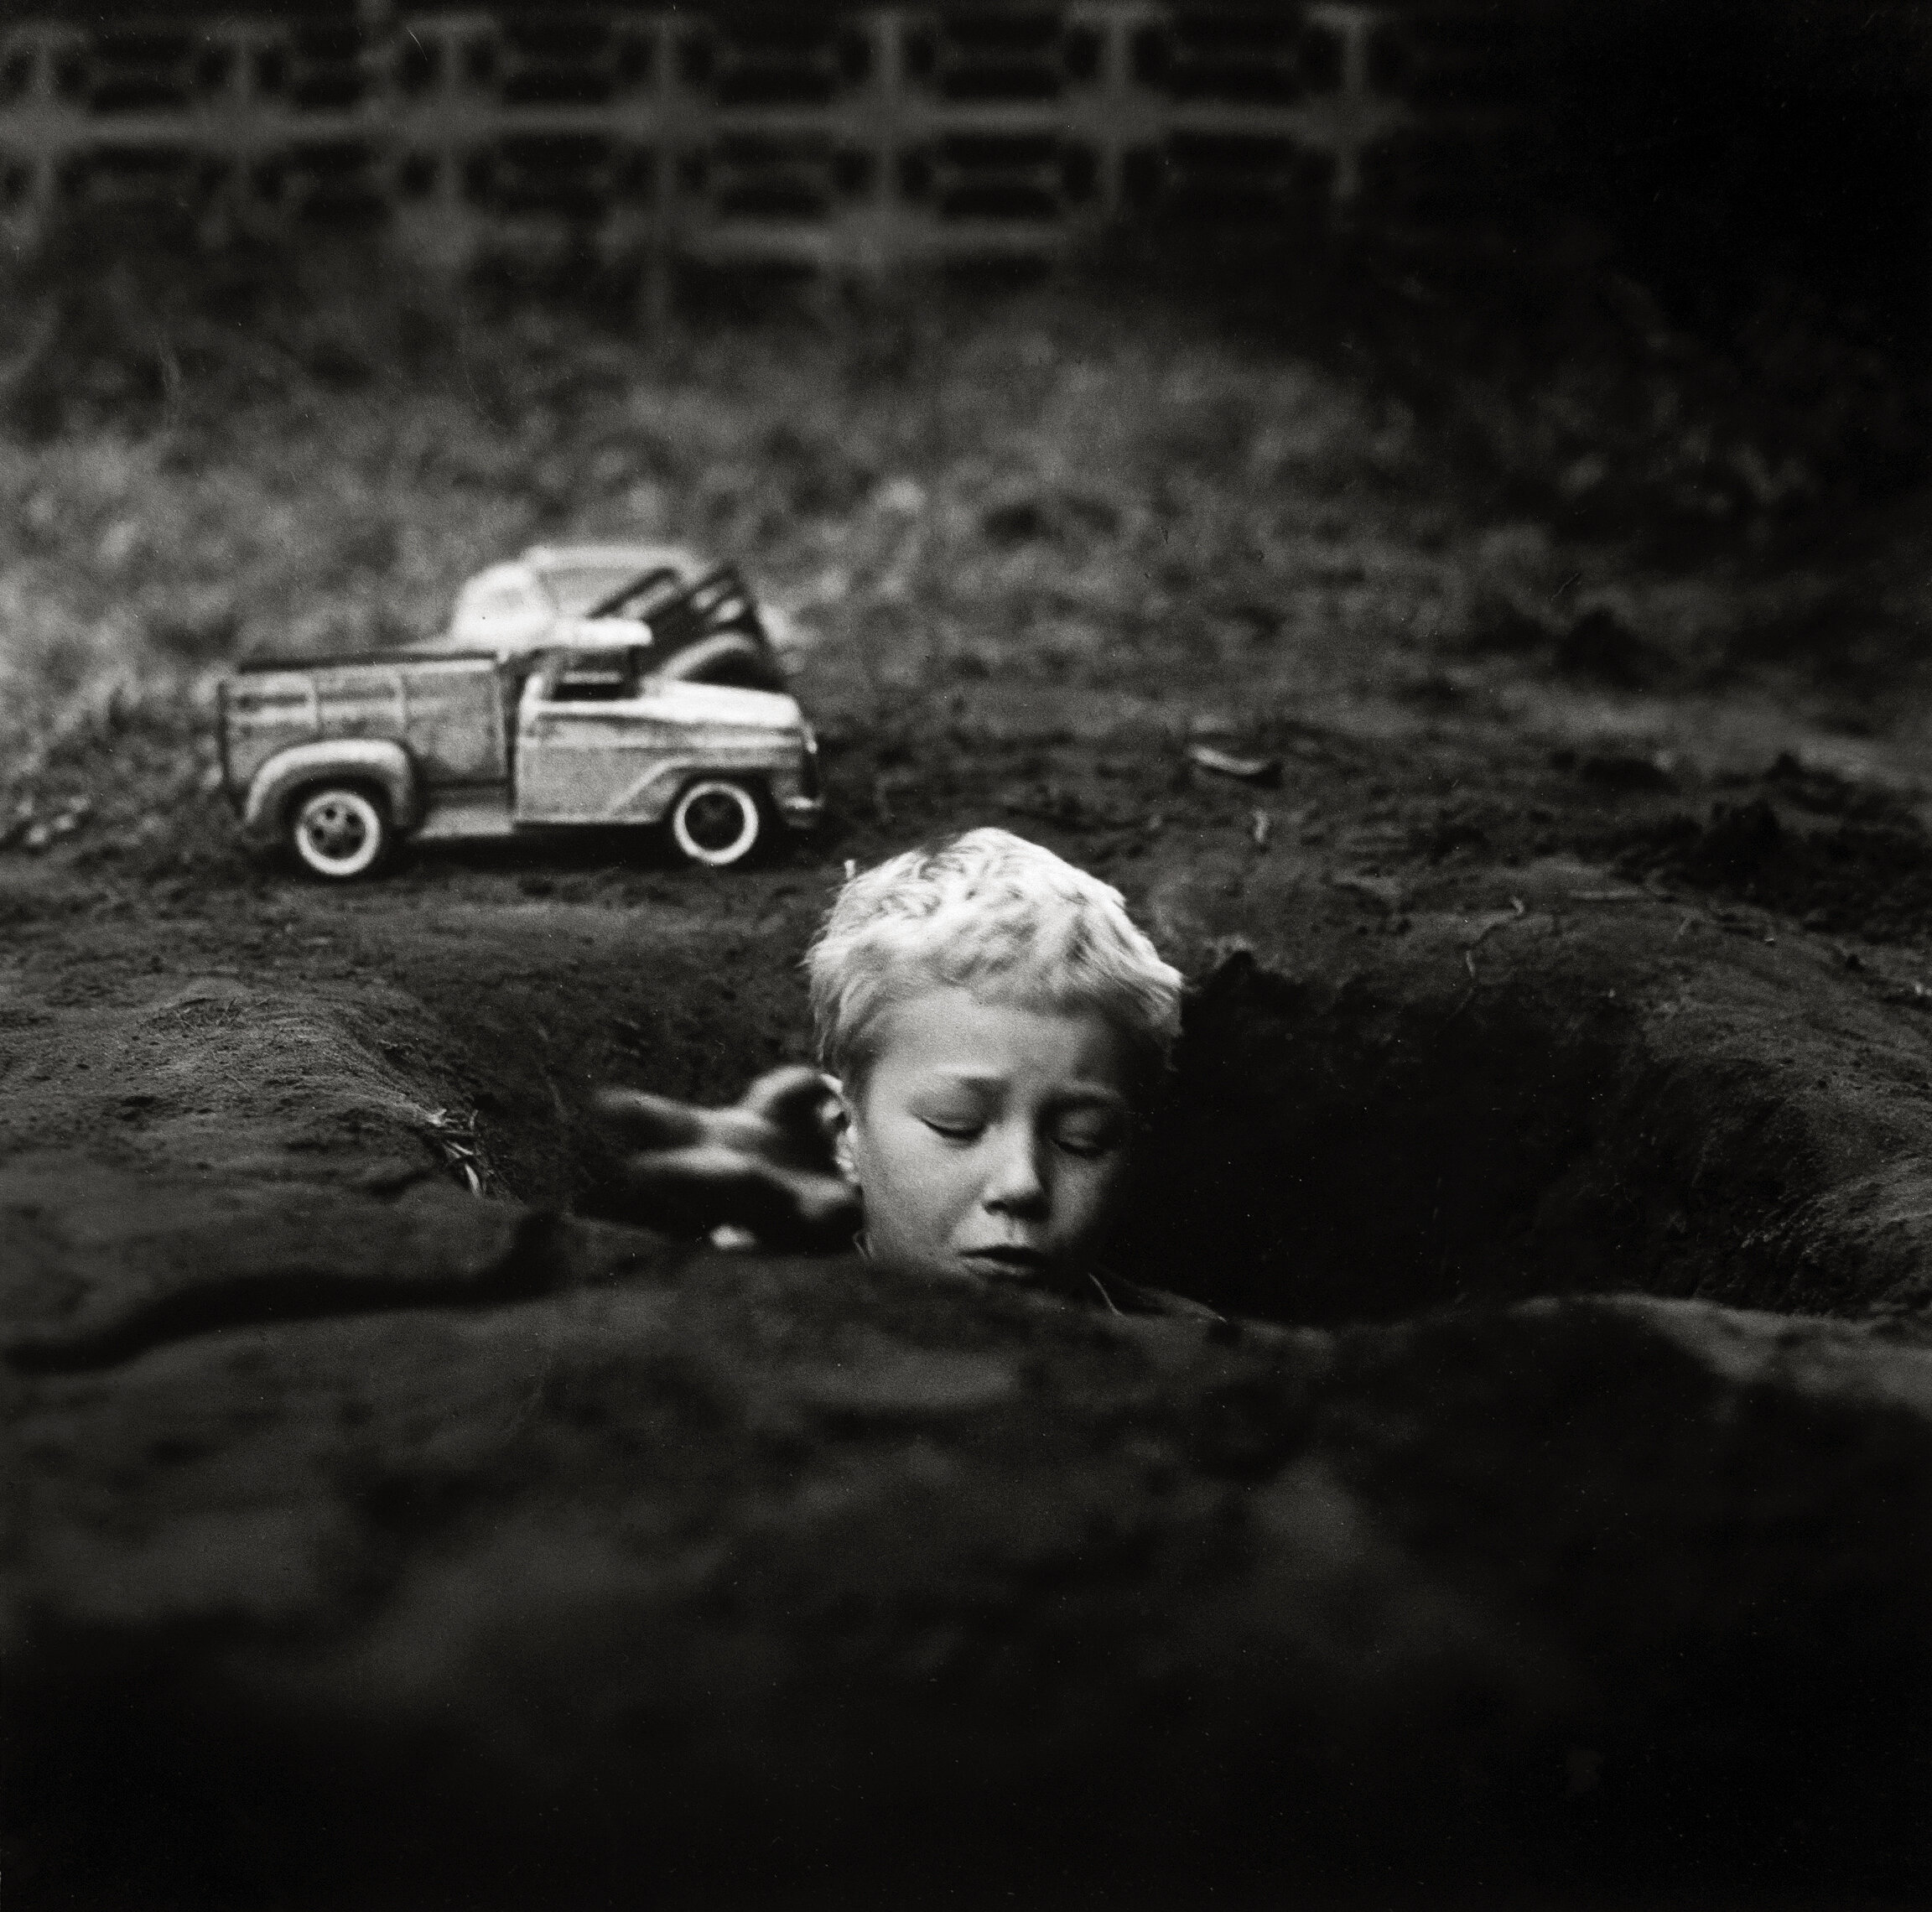 Child in Hole, 1985